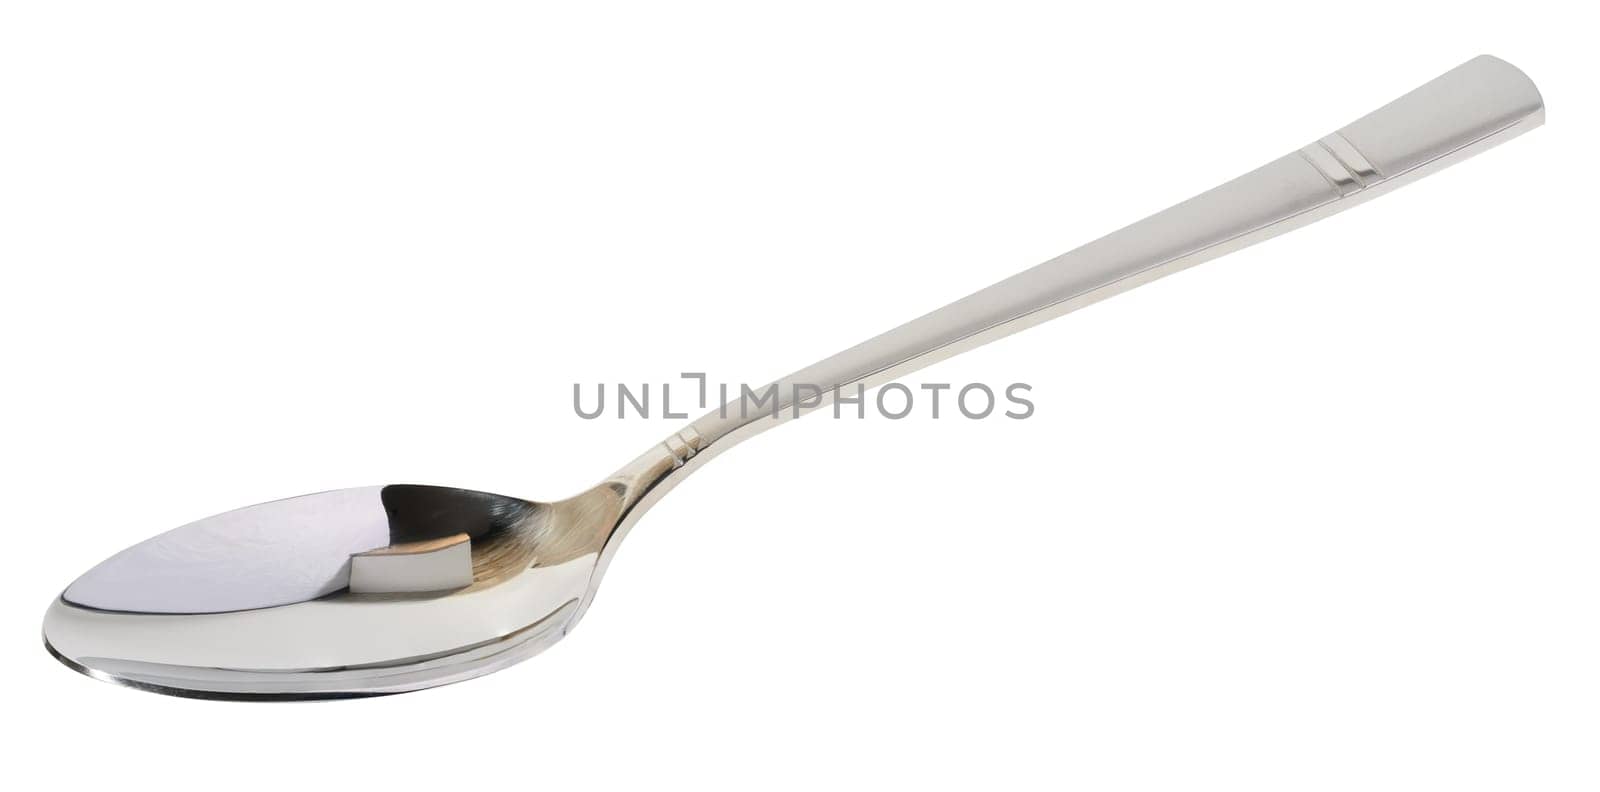 New steel dinner spoon on isolated background by ndanko